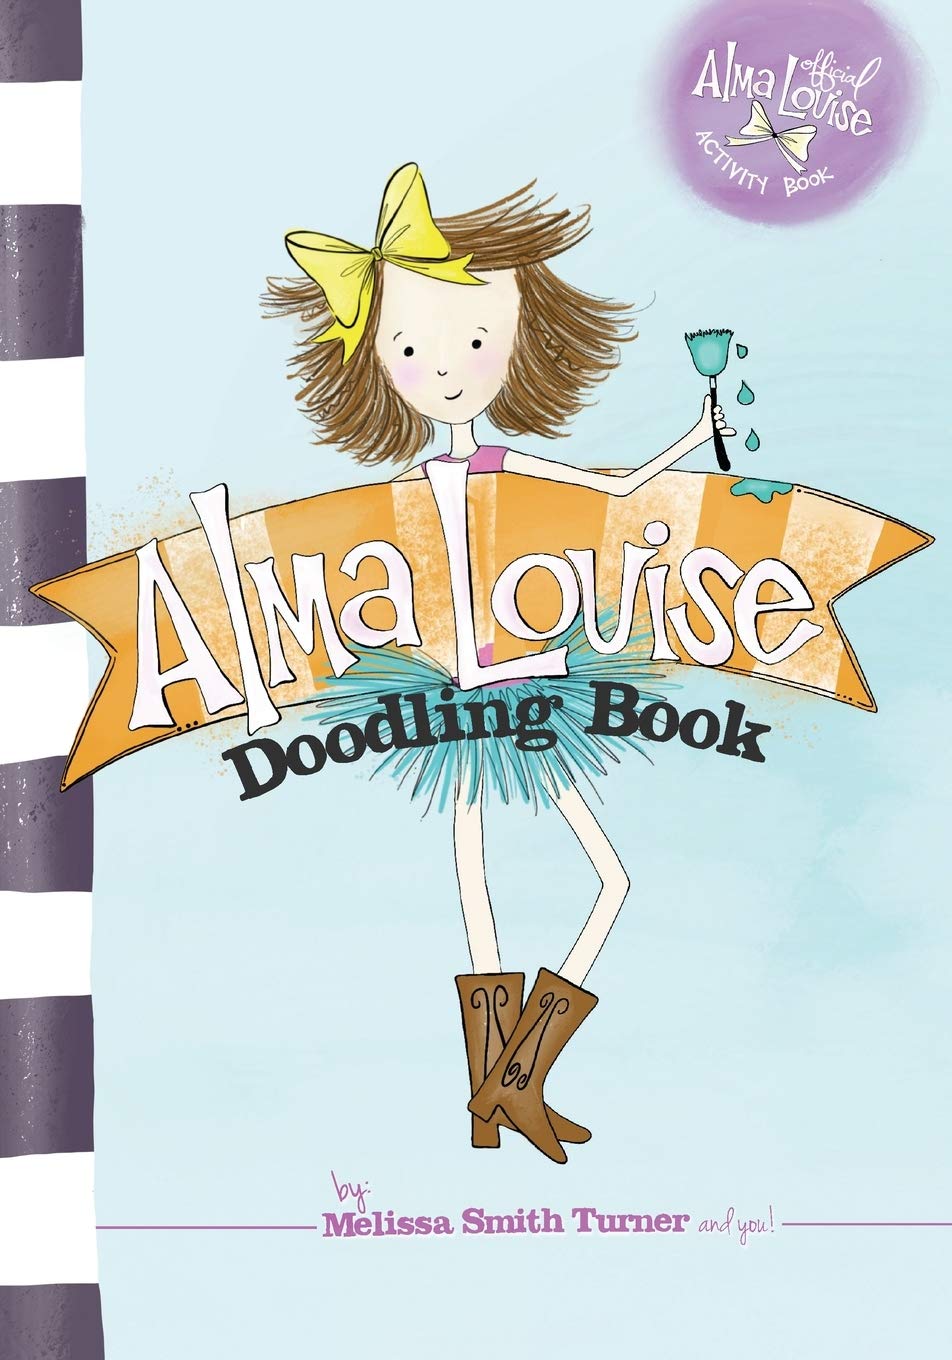 The Alma Louise Doodling Book